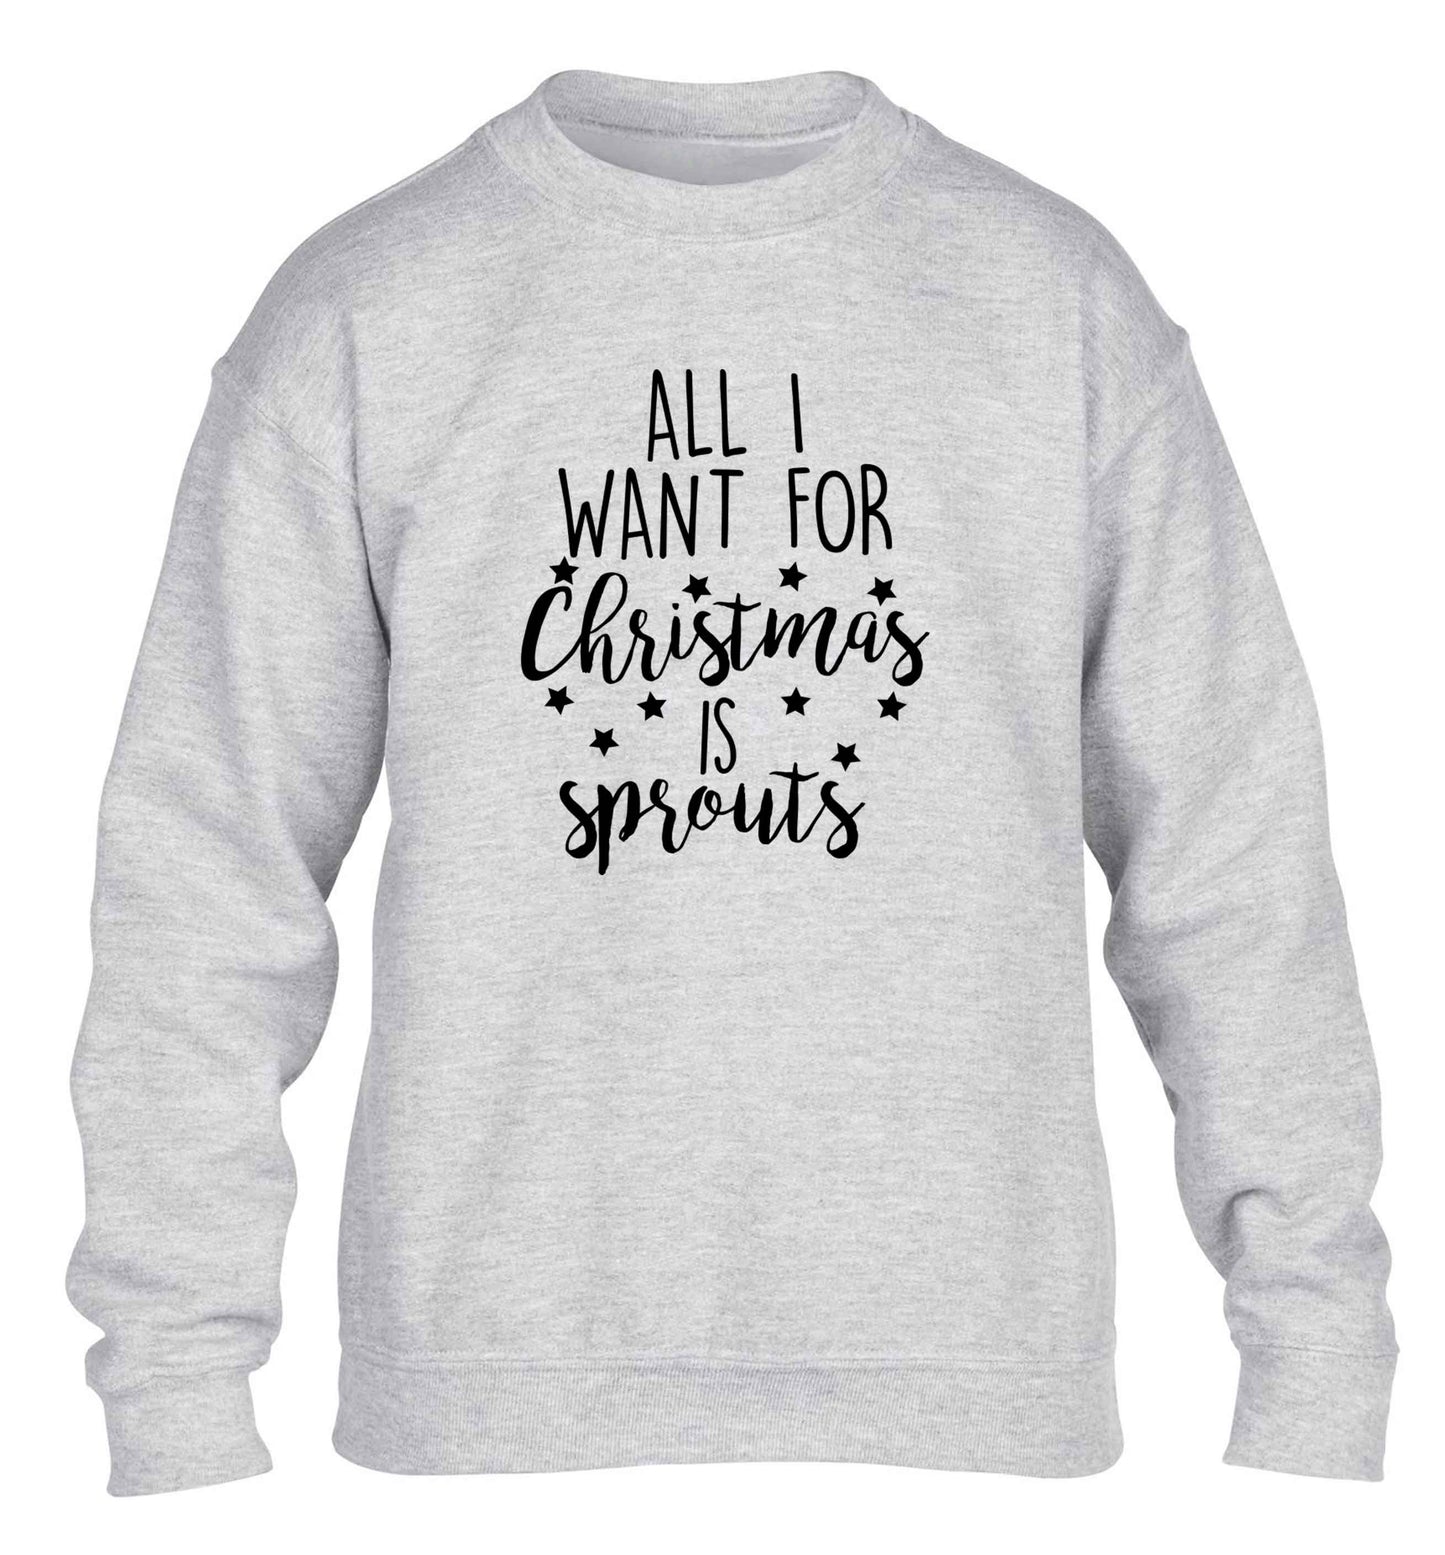 All I want for Christmas is sprouts children's grey sweater 12-13 Years